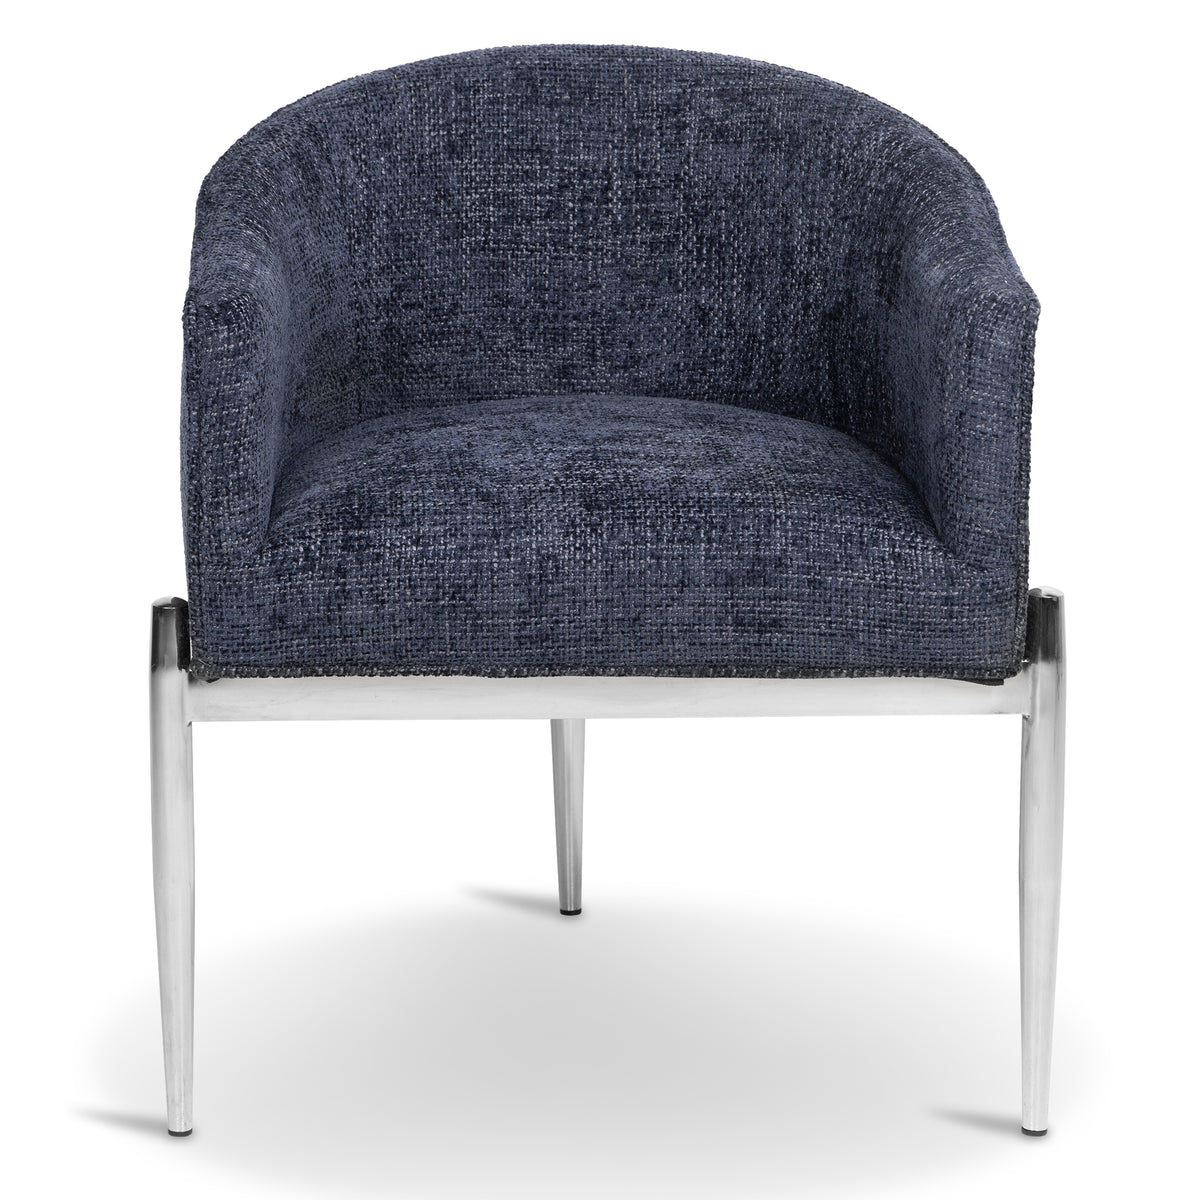 Art Deco Dining Chair in Knit Fabric